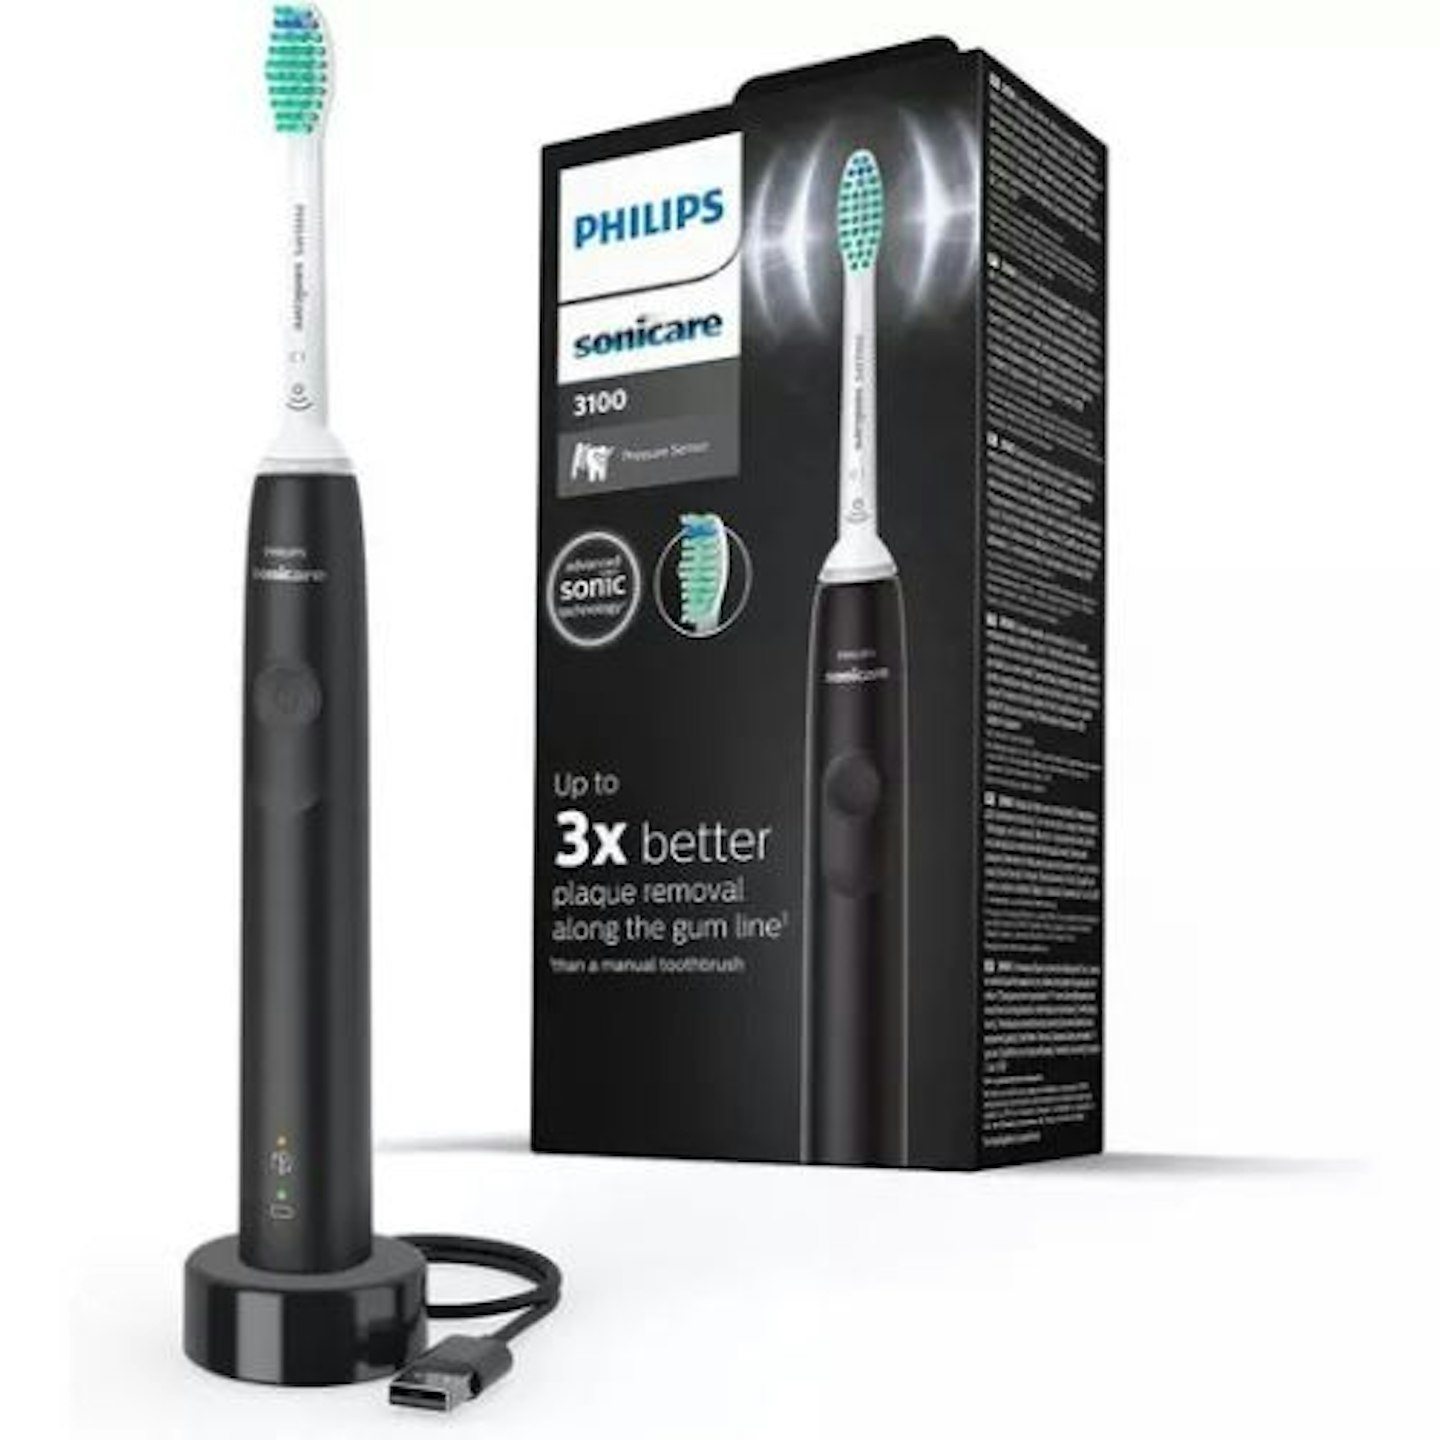 PHILIPS Sonicare 3100 Electric Toothbrush - Black